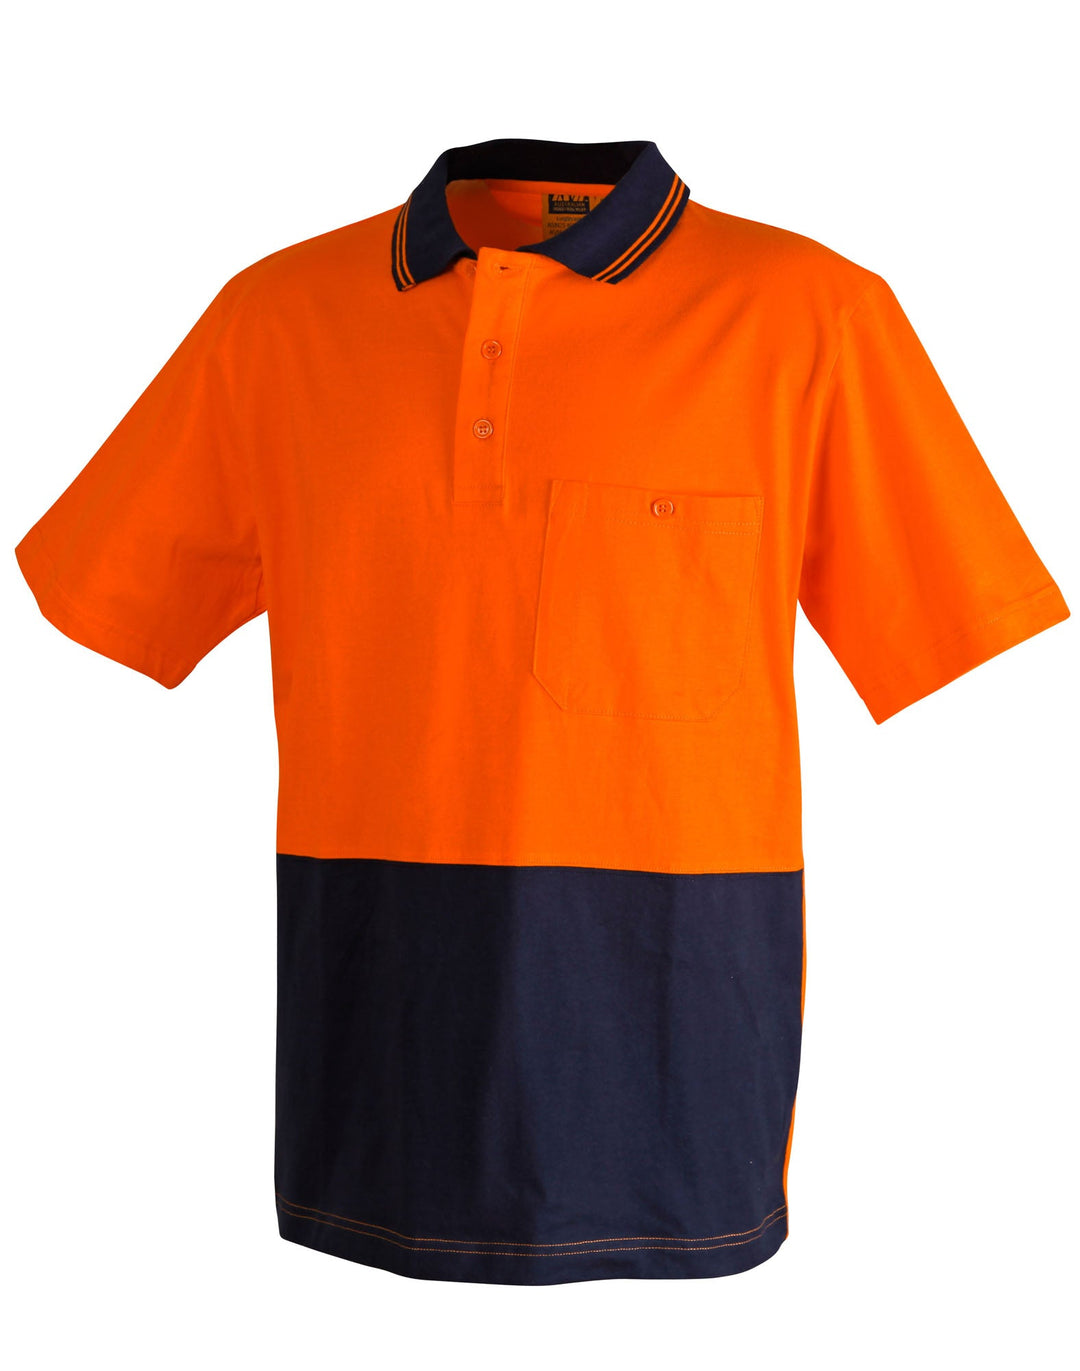 AIW SW35 Cotton Jersey Two Tone Safety Polo